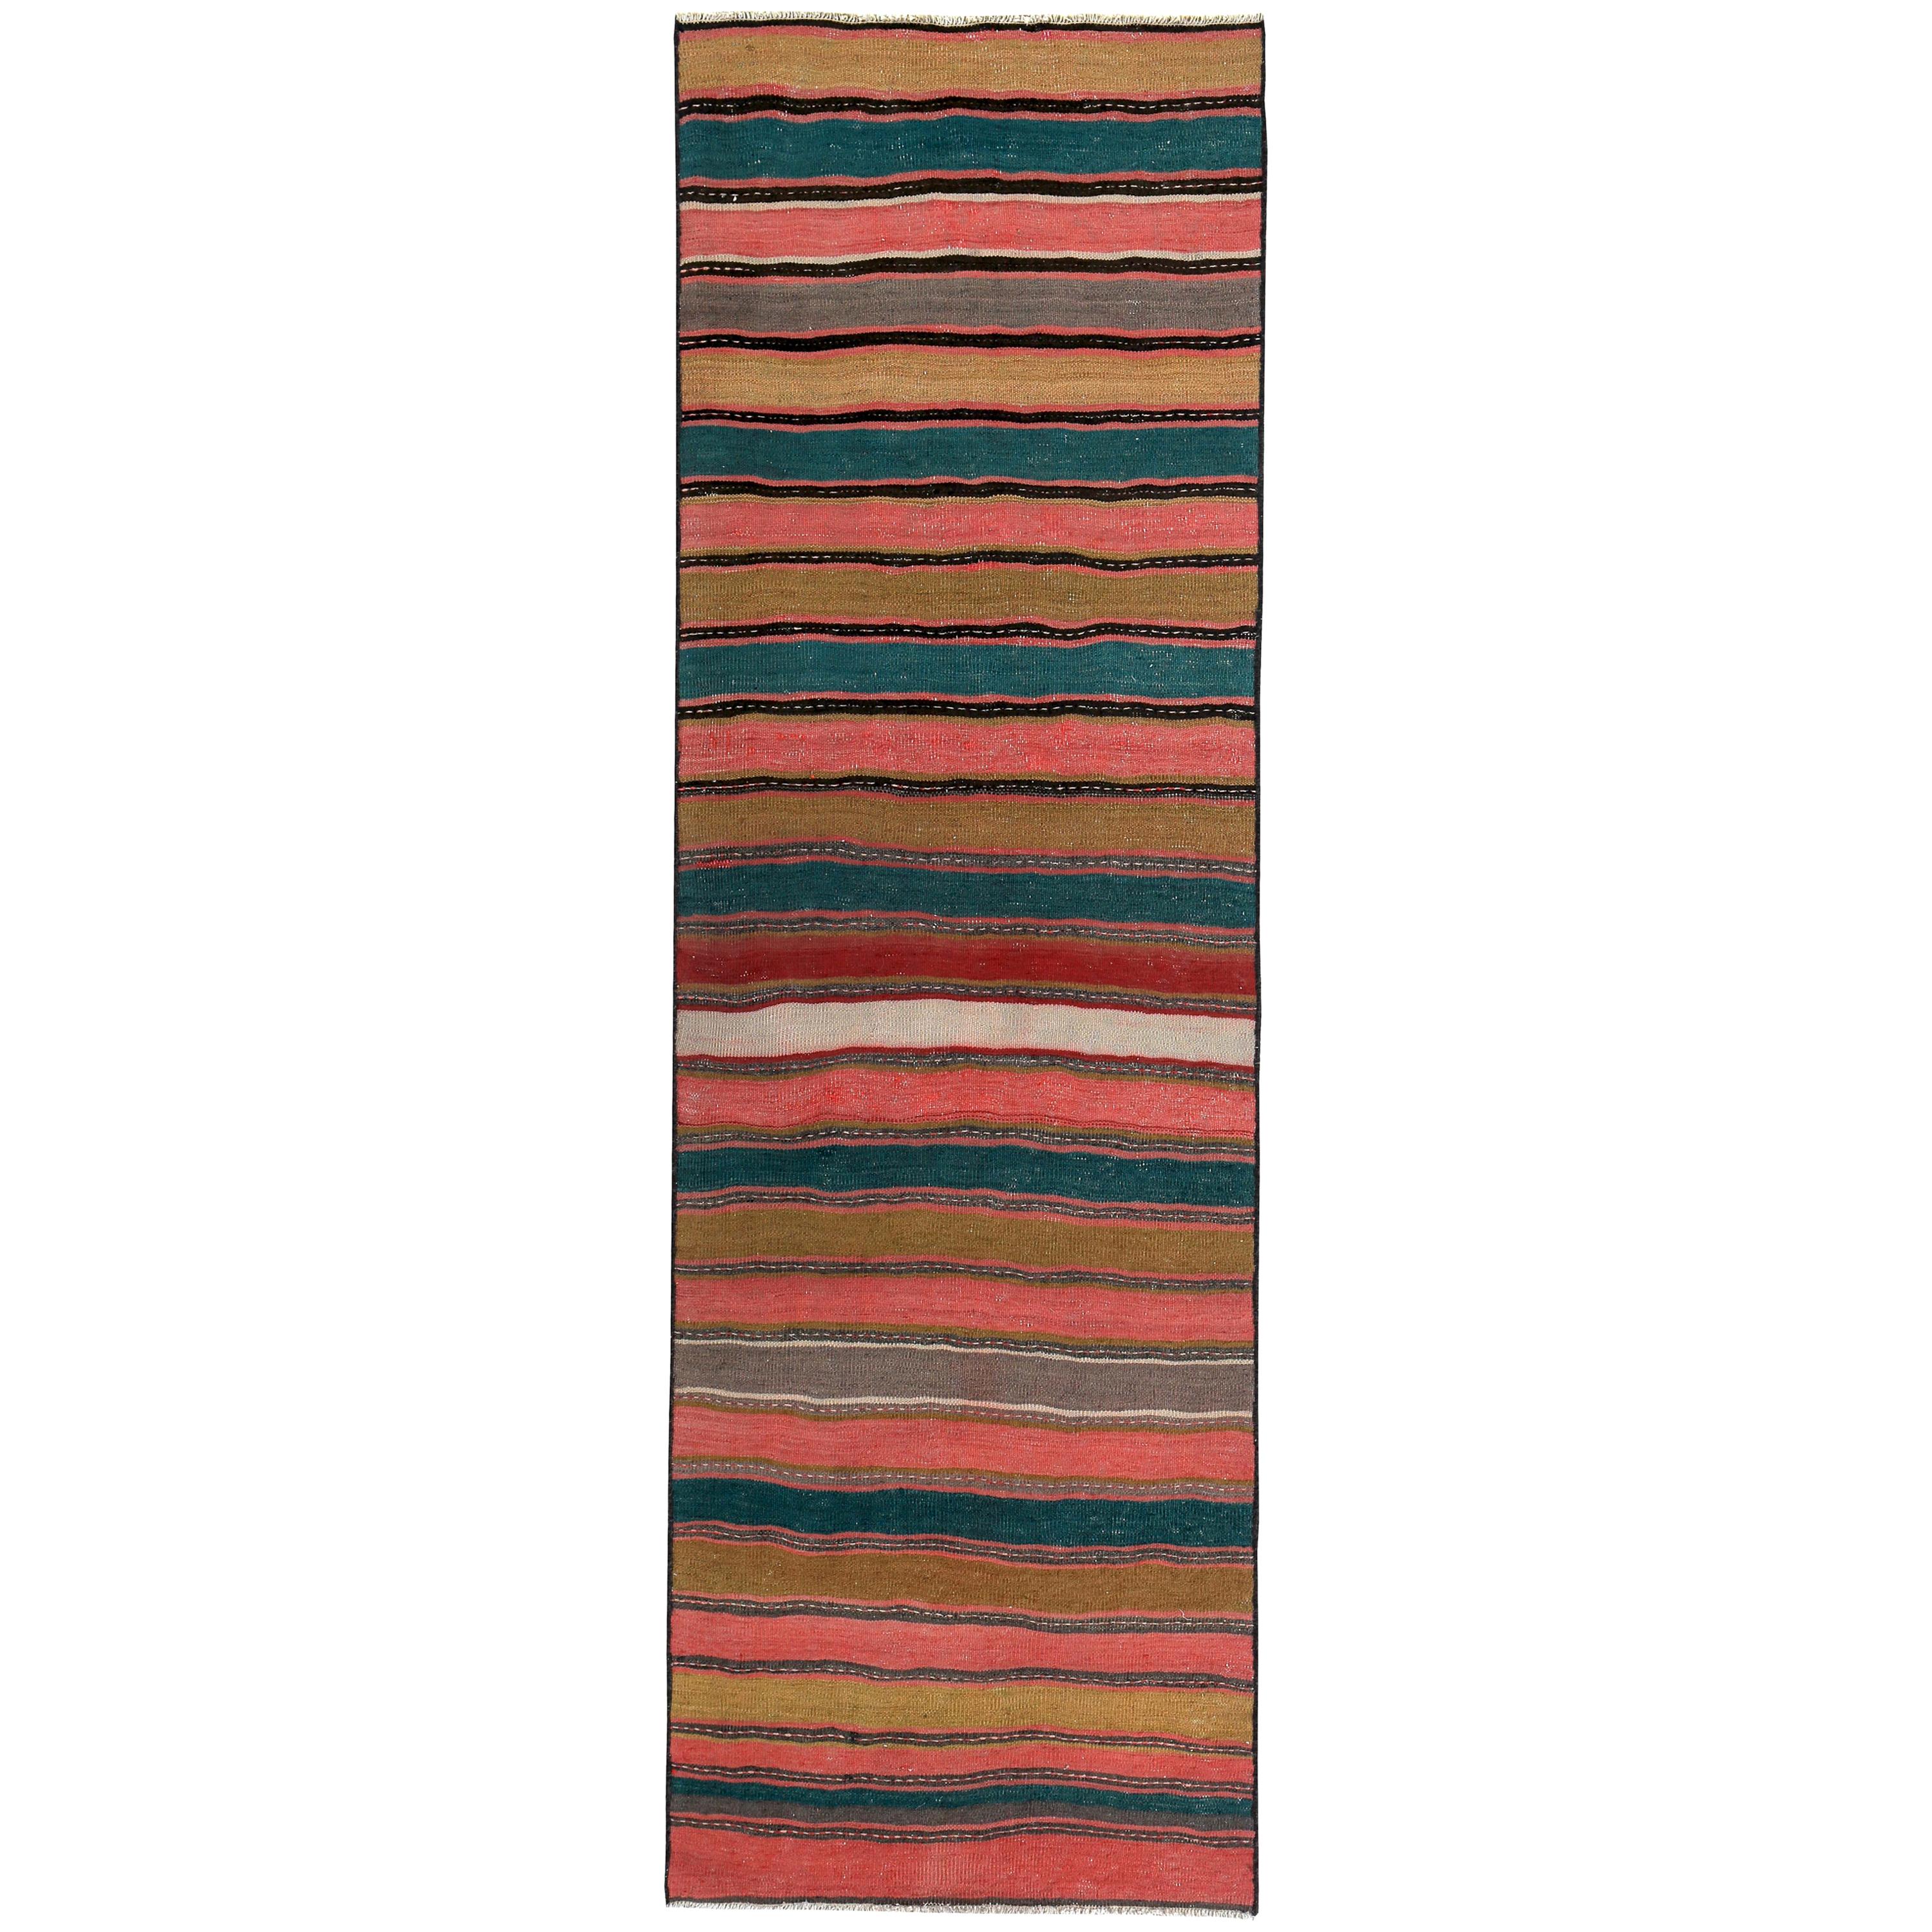 Modern Turkish Kilim Runner Rug with Green, Red and Brown Stripes For Sale